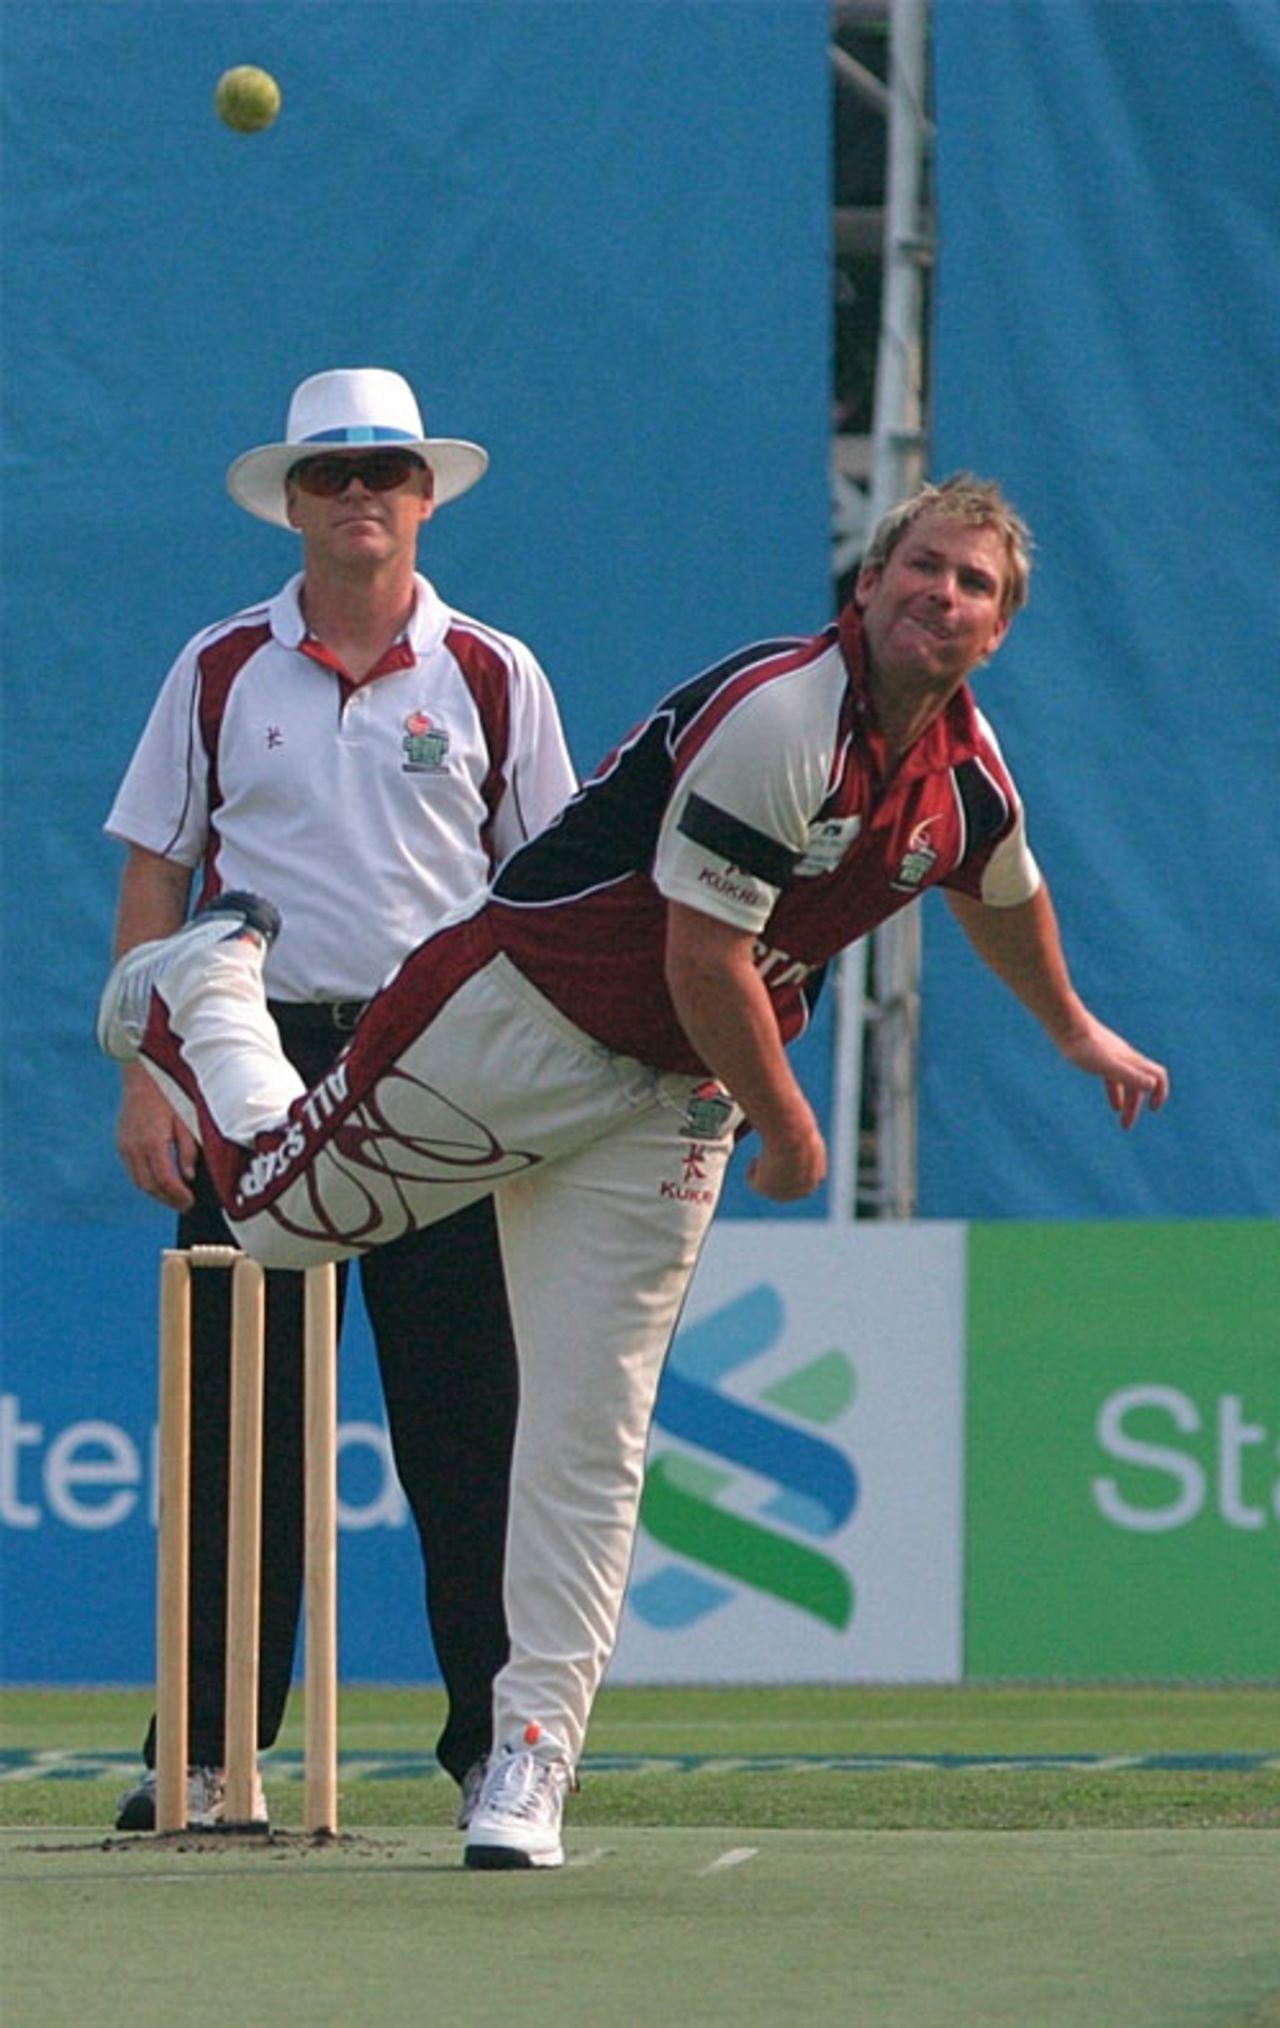 Shane Warne turns his arm over during the Hong Kong Cricket Sixes, Kowloon Cricket Club, October 27, 2007